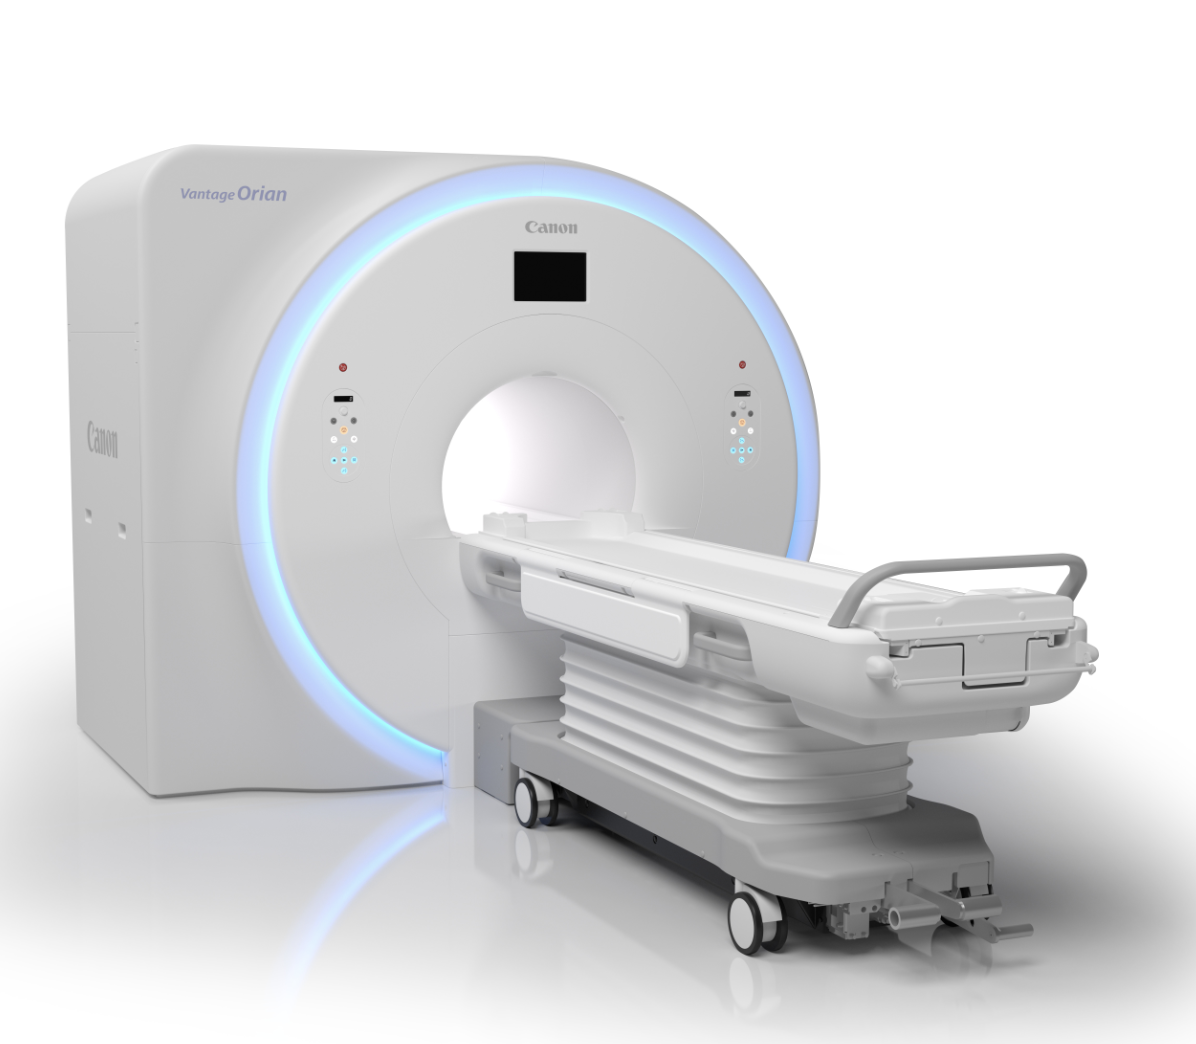 Canon medical MRI for diagnosing many different diseases and conditions